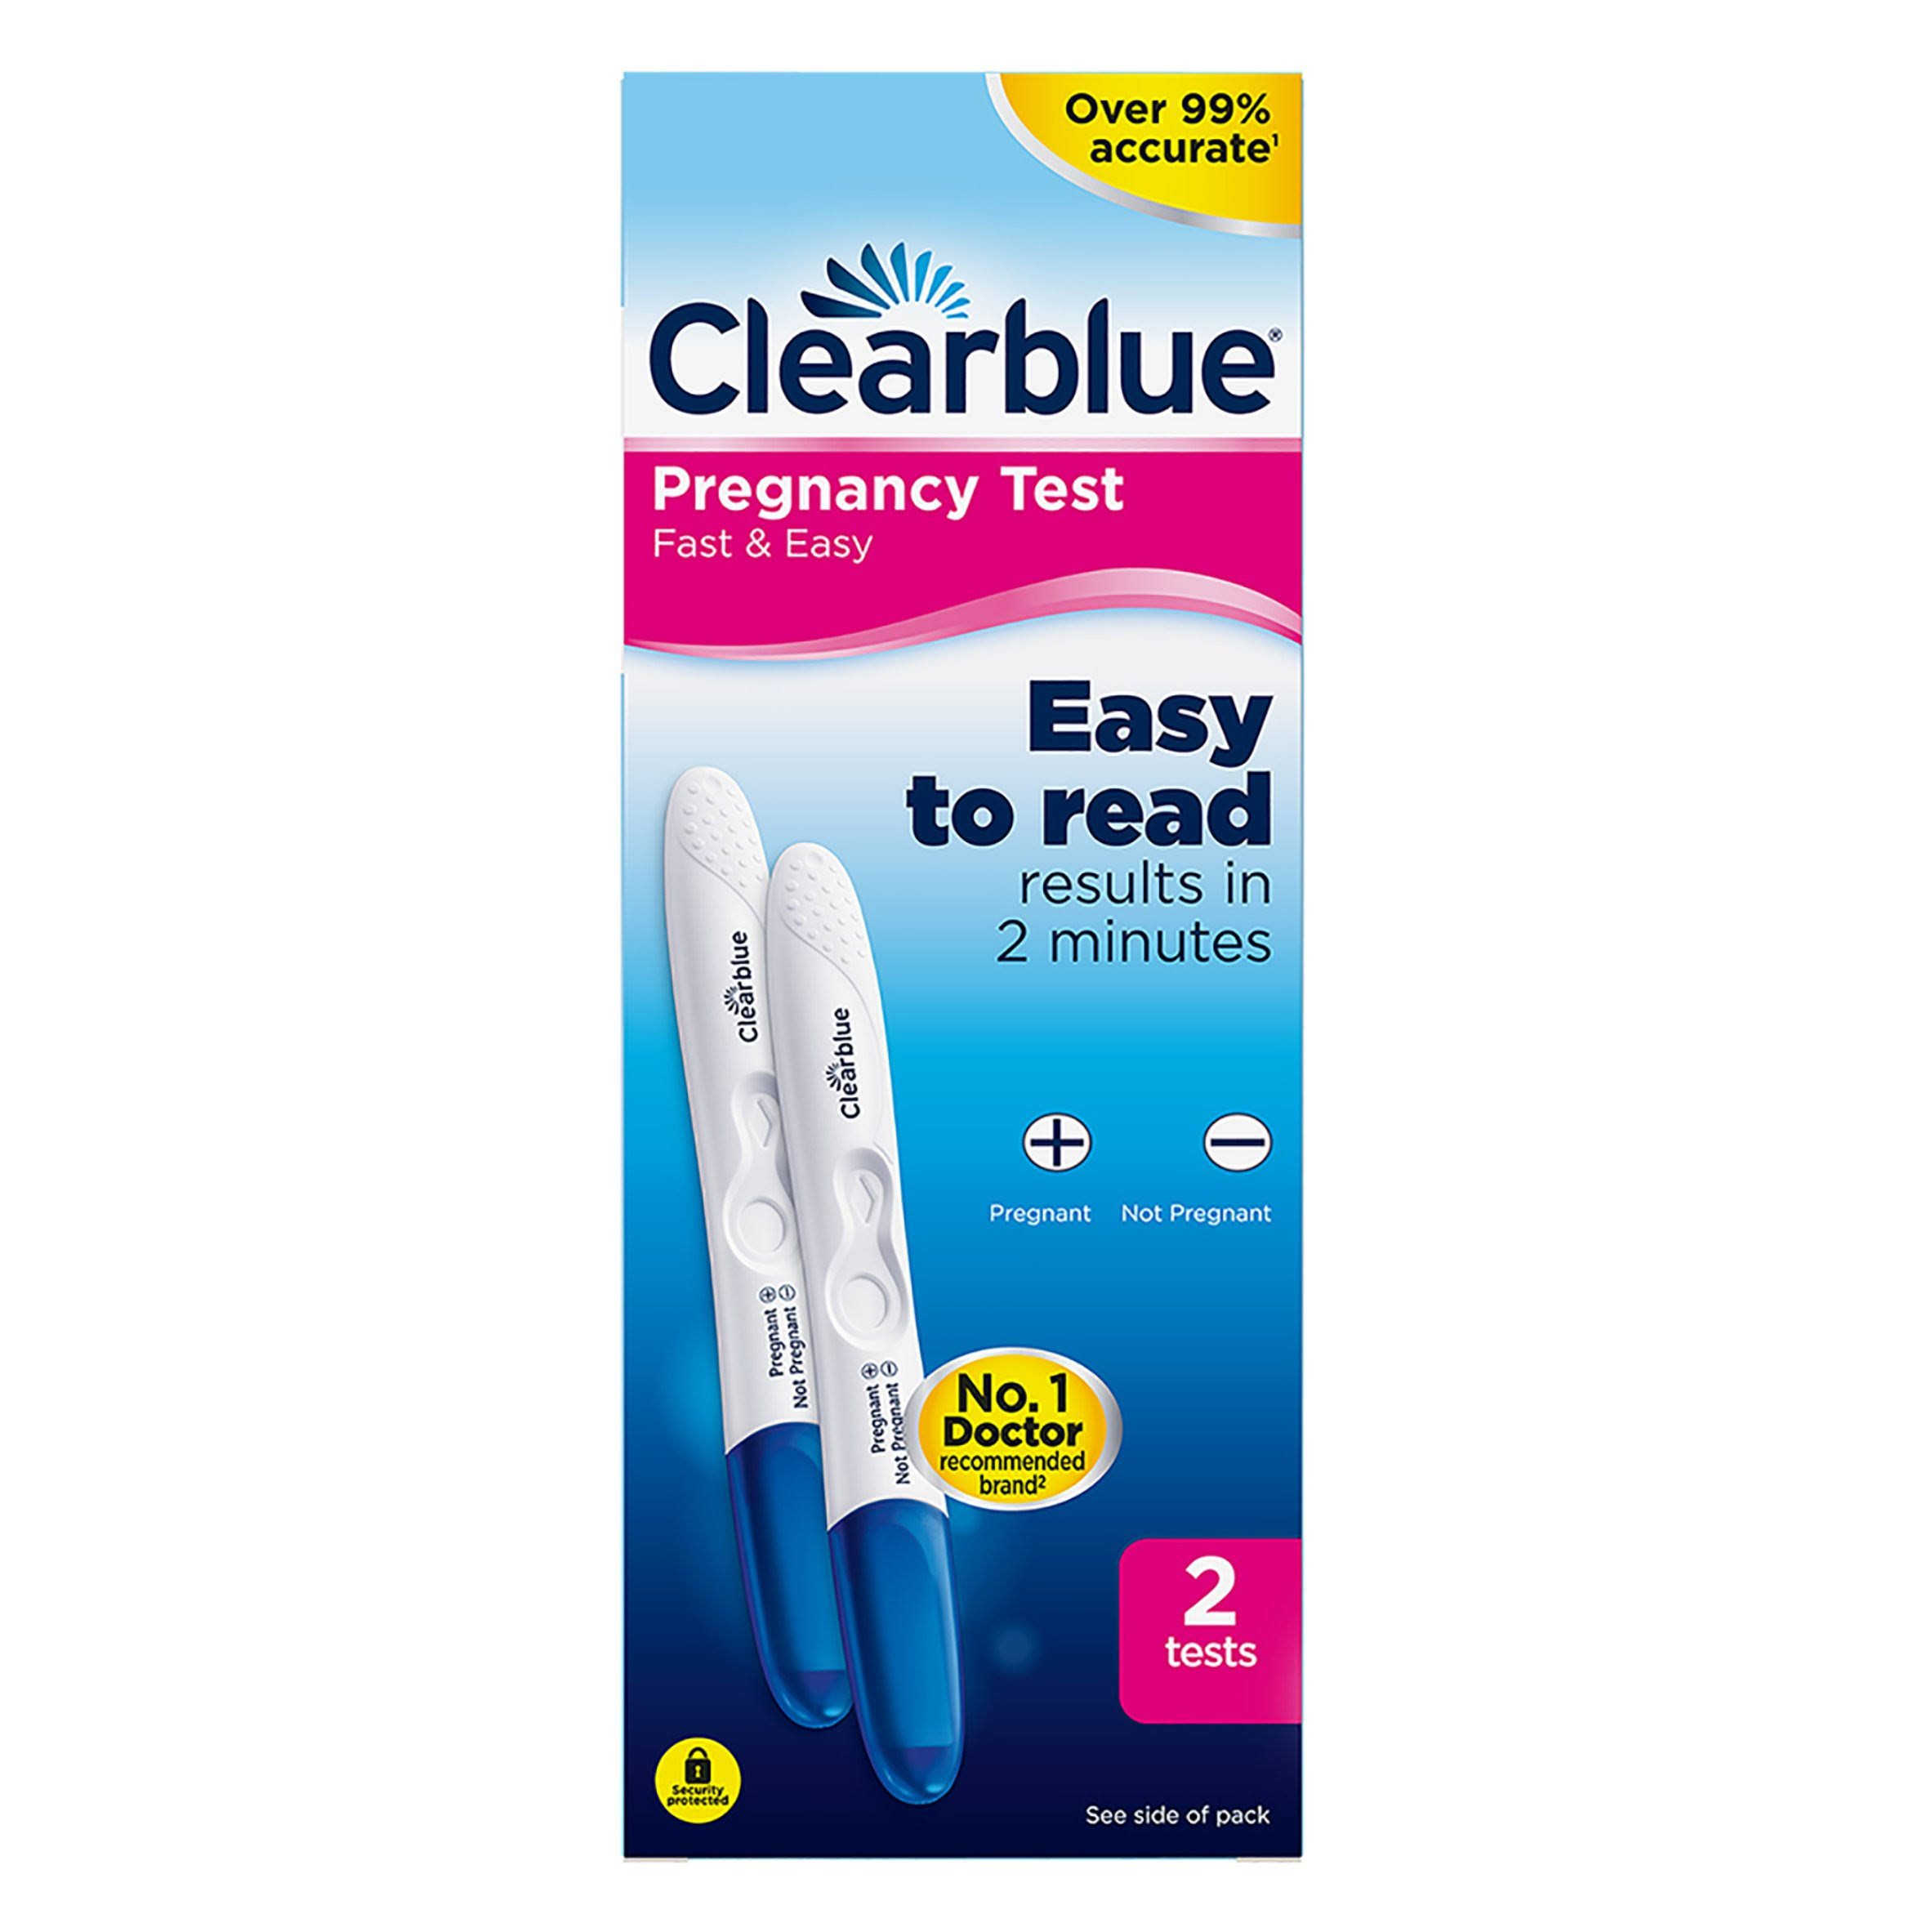 Clearblue Fast and Easy Pregnancy Test Kit - 2pcs